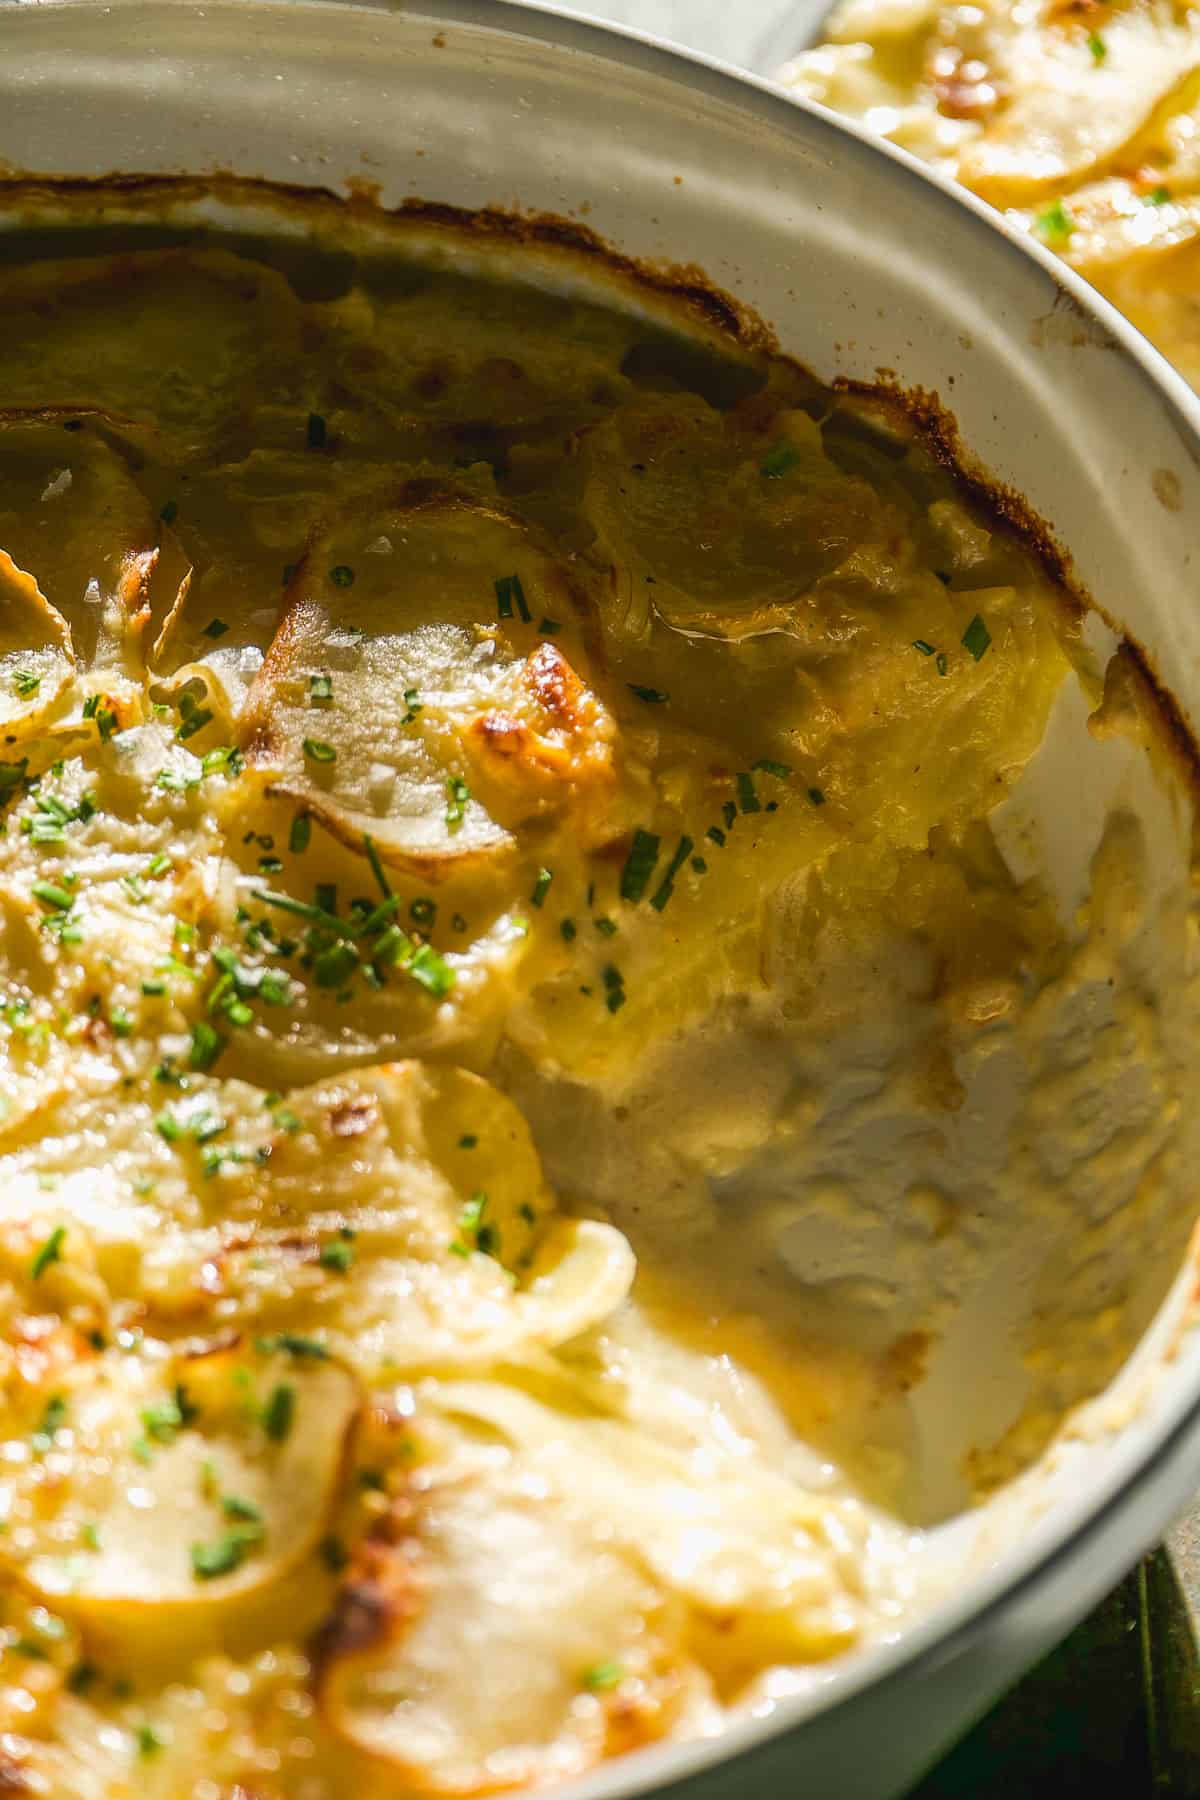 Goat cheese scalloped potatoes in a dish.